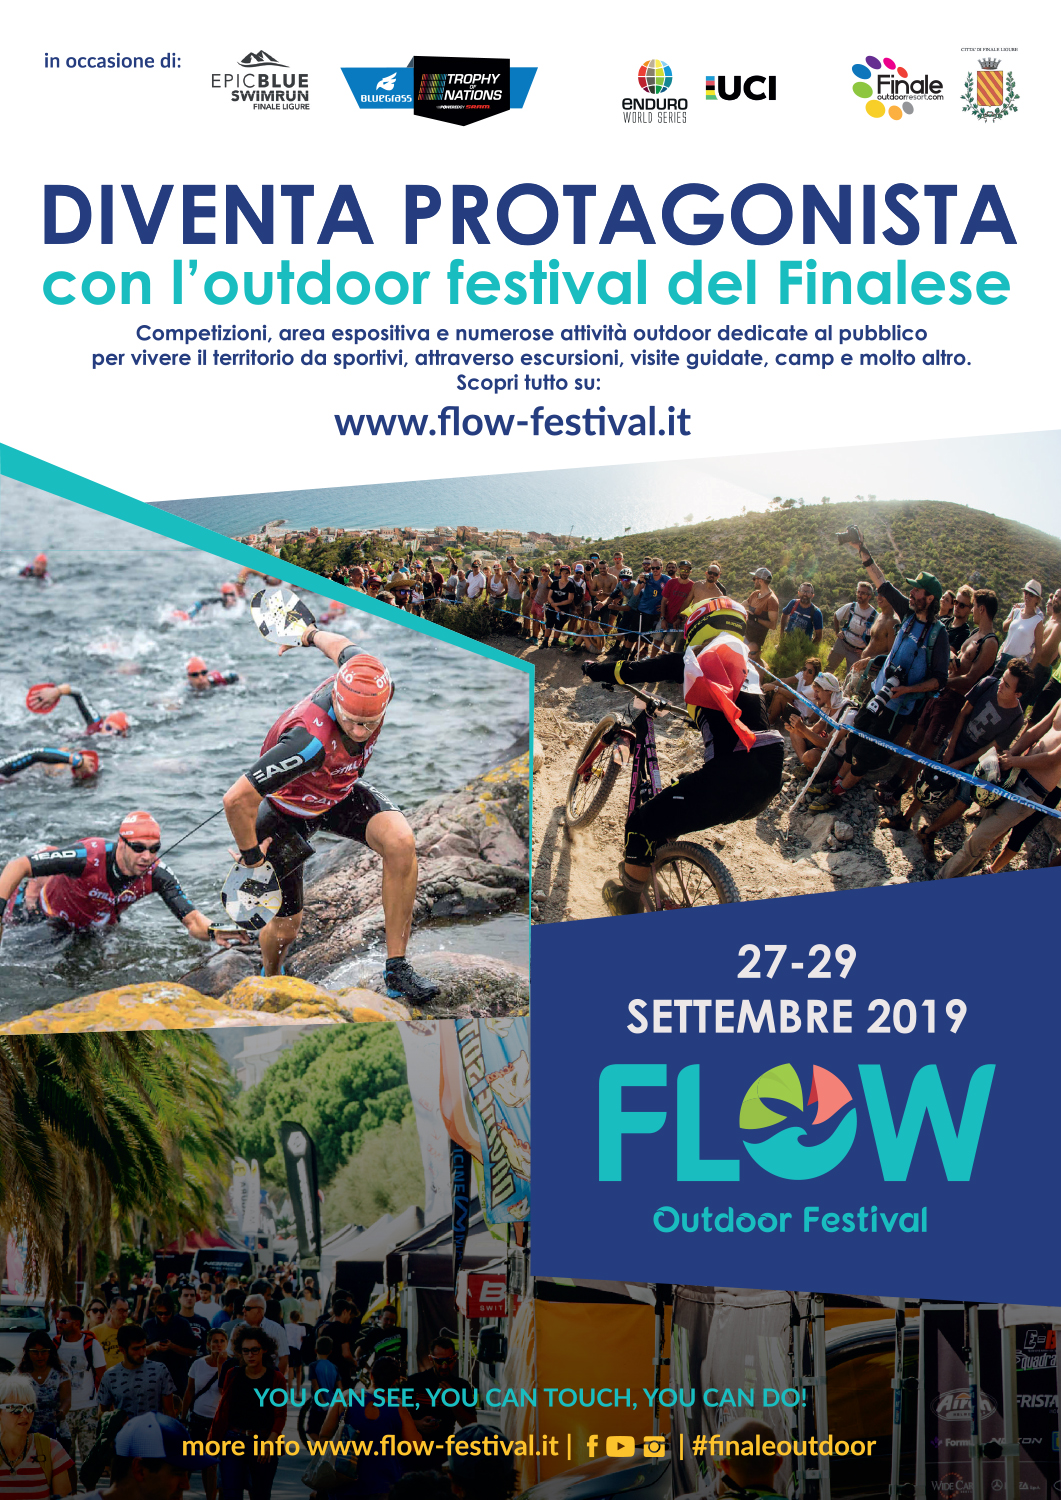 Flow Outdoor Festival is gearing up for a very exciting activity-packed fourth edition